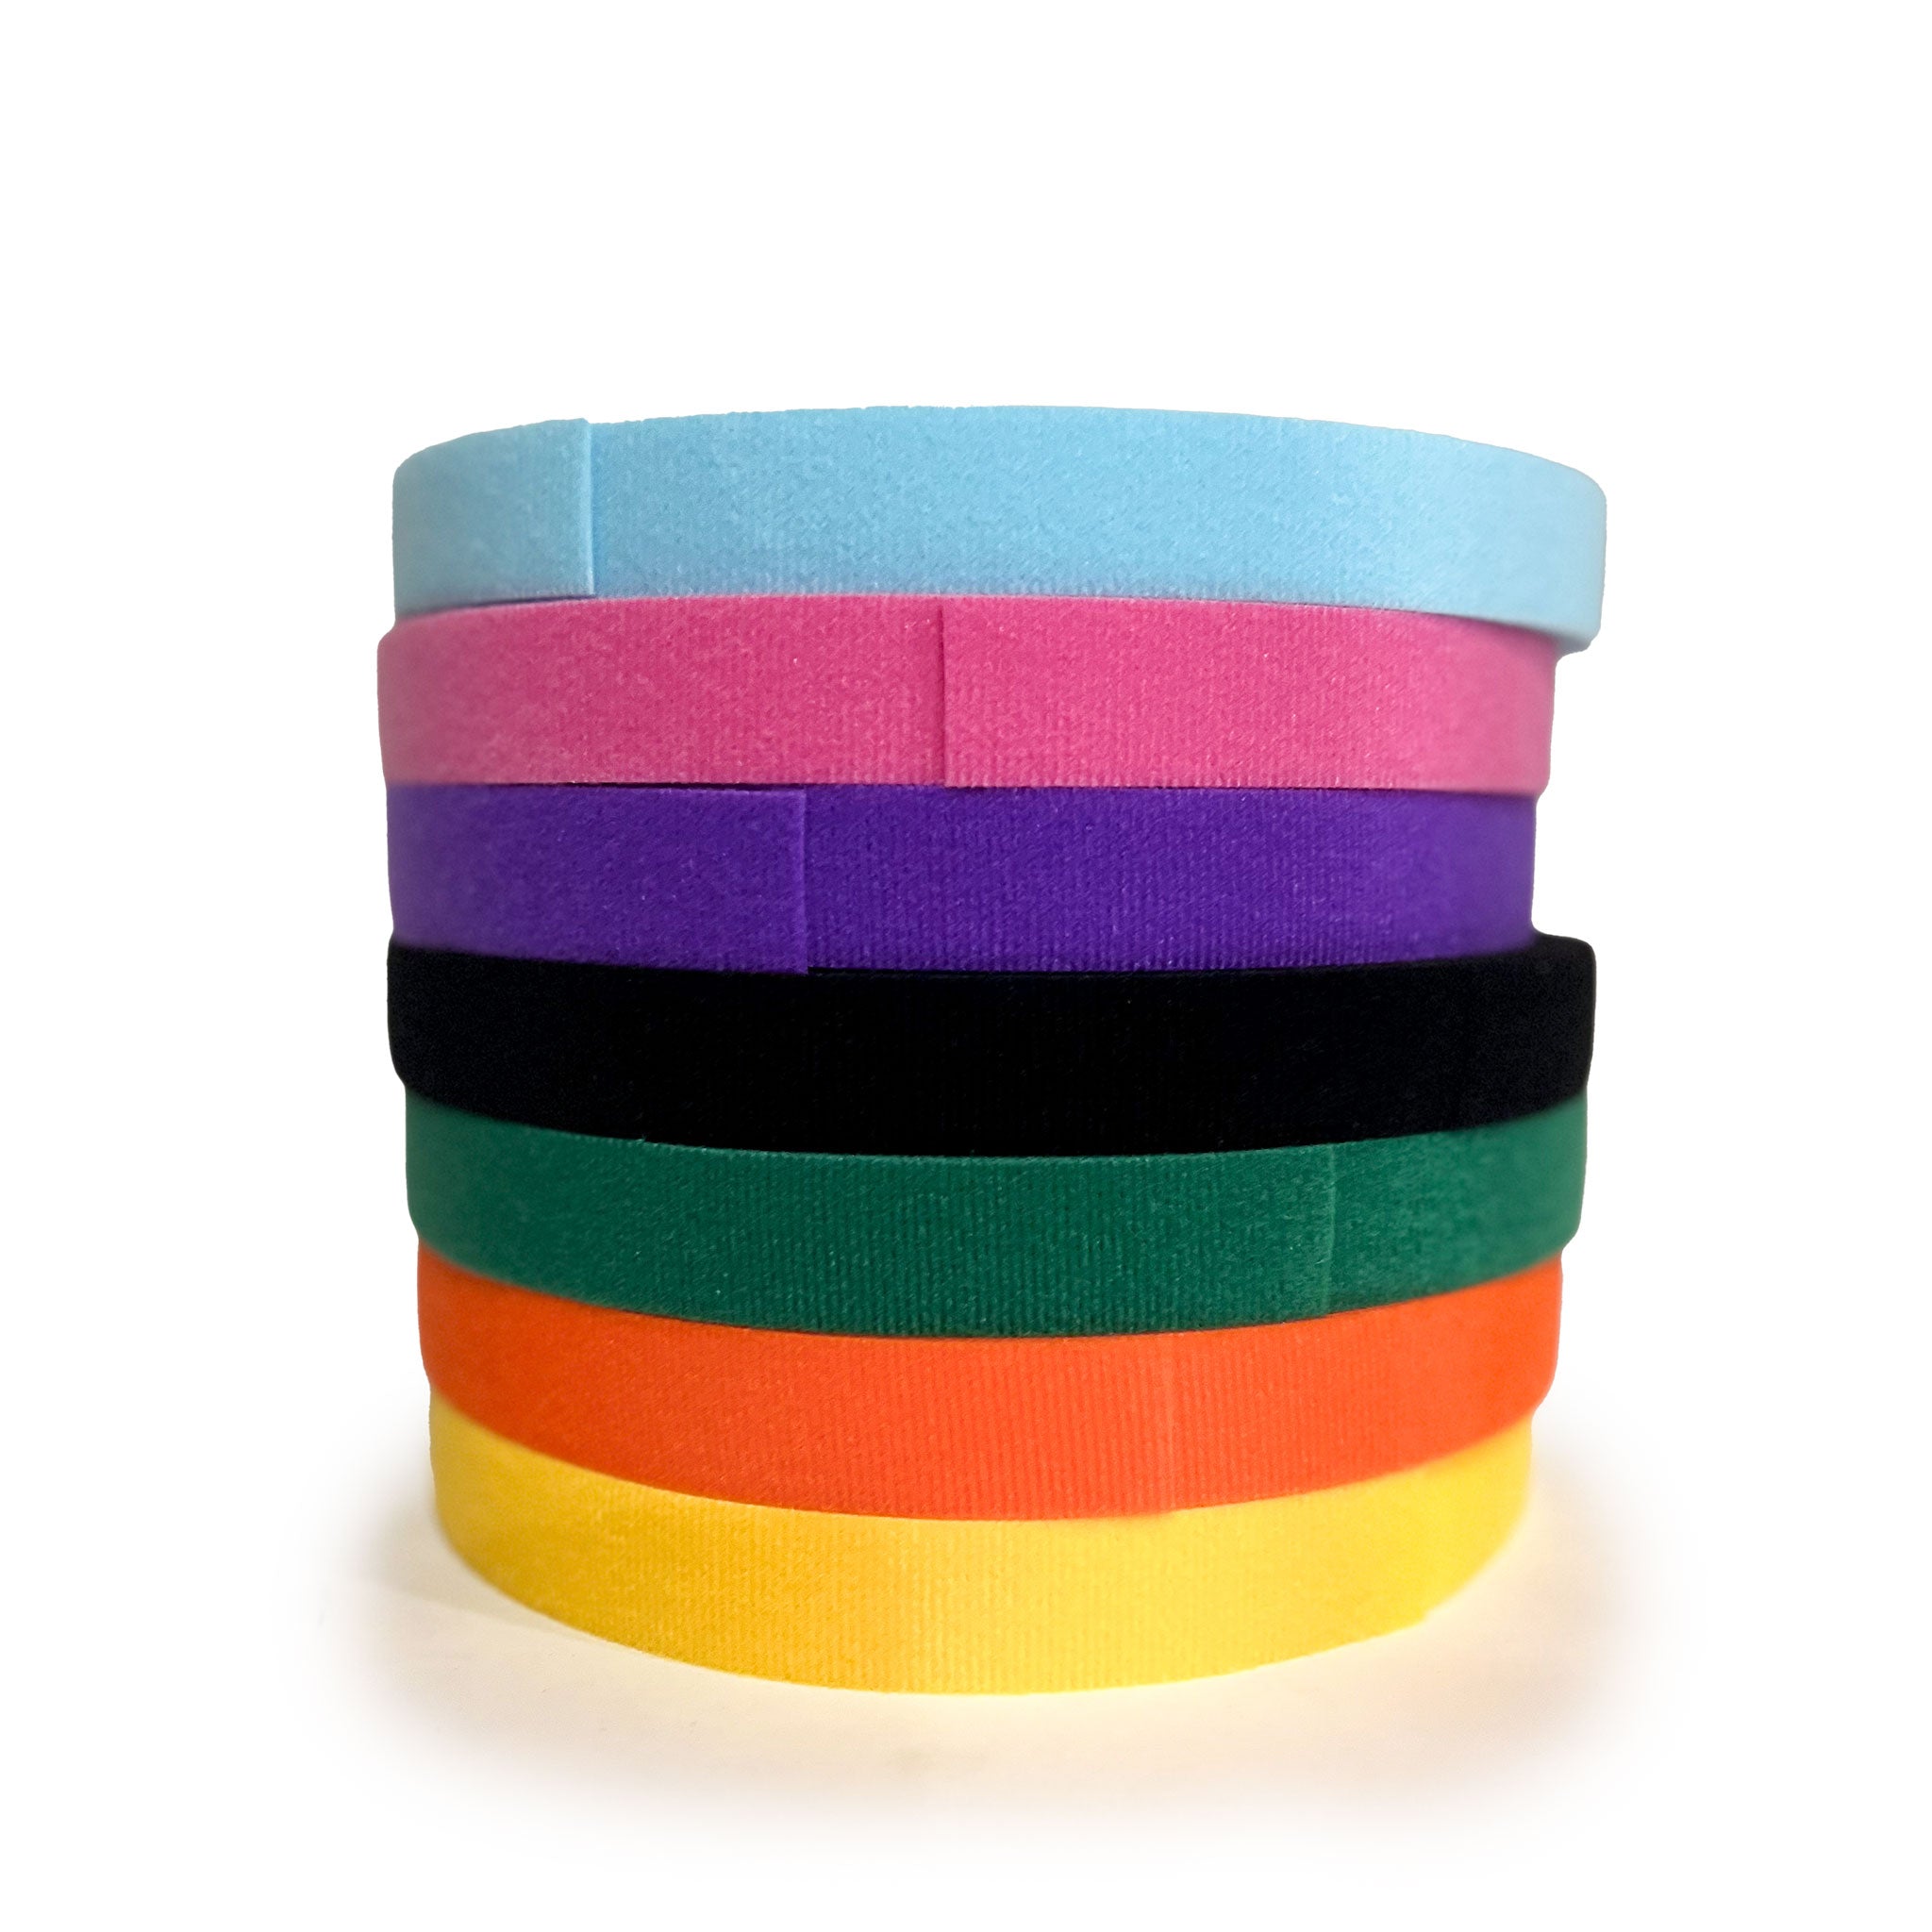 Seven colors of velcro one wrap